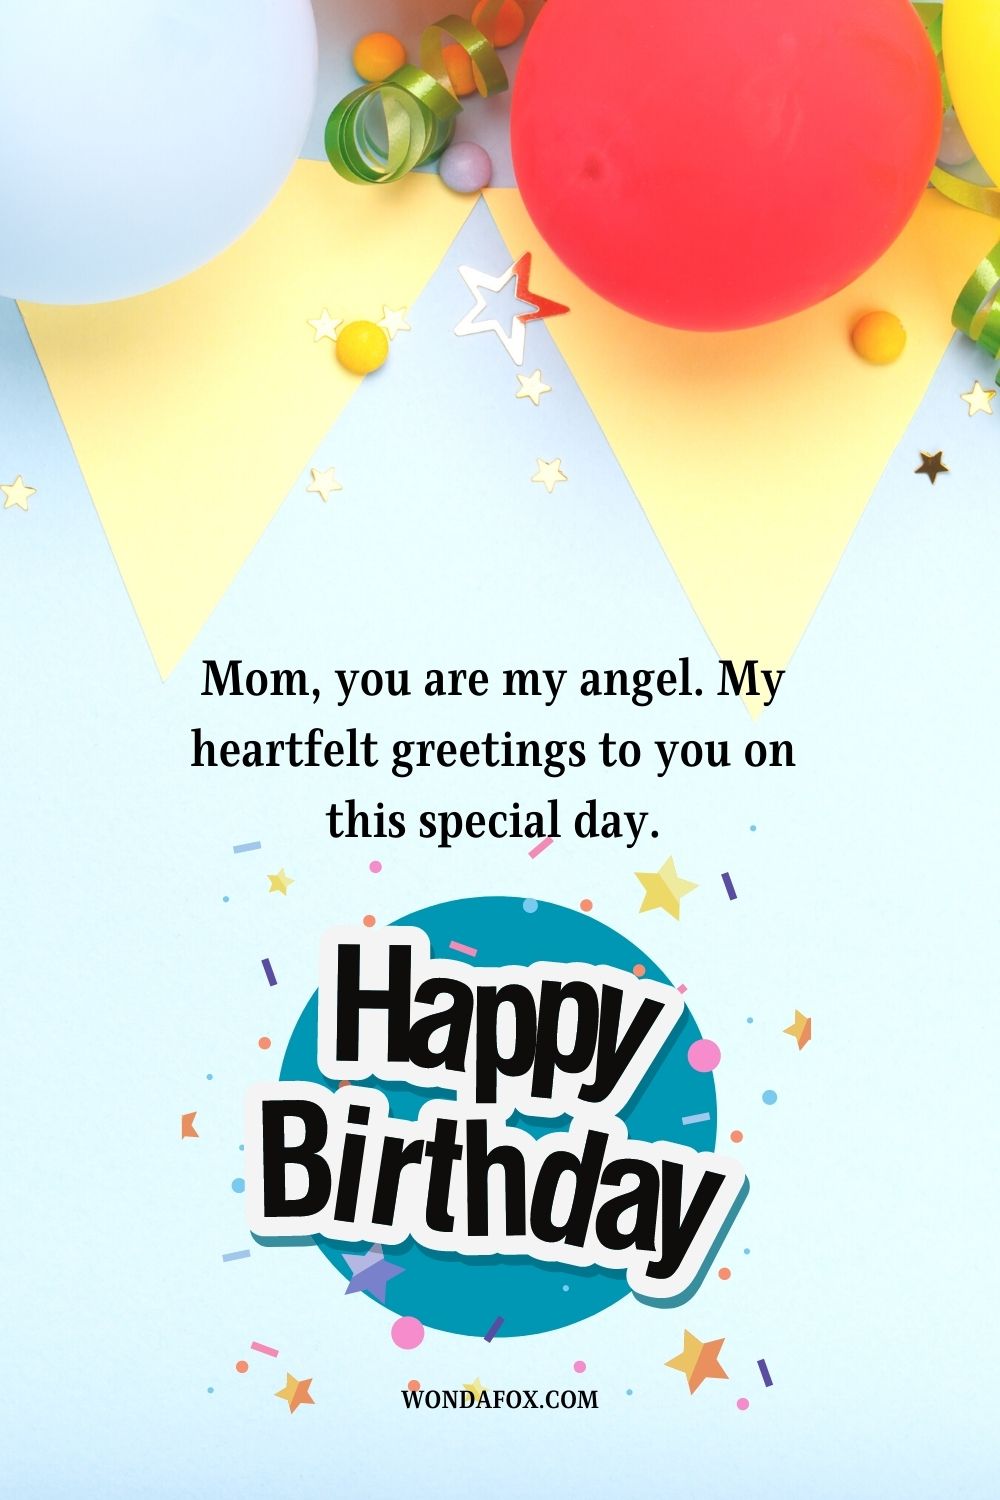 Mom, you are my angel. My heartfelt greetings to you on this special day. Happy Birthday.